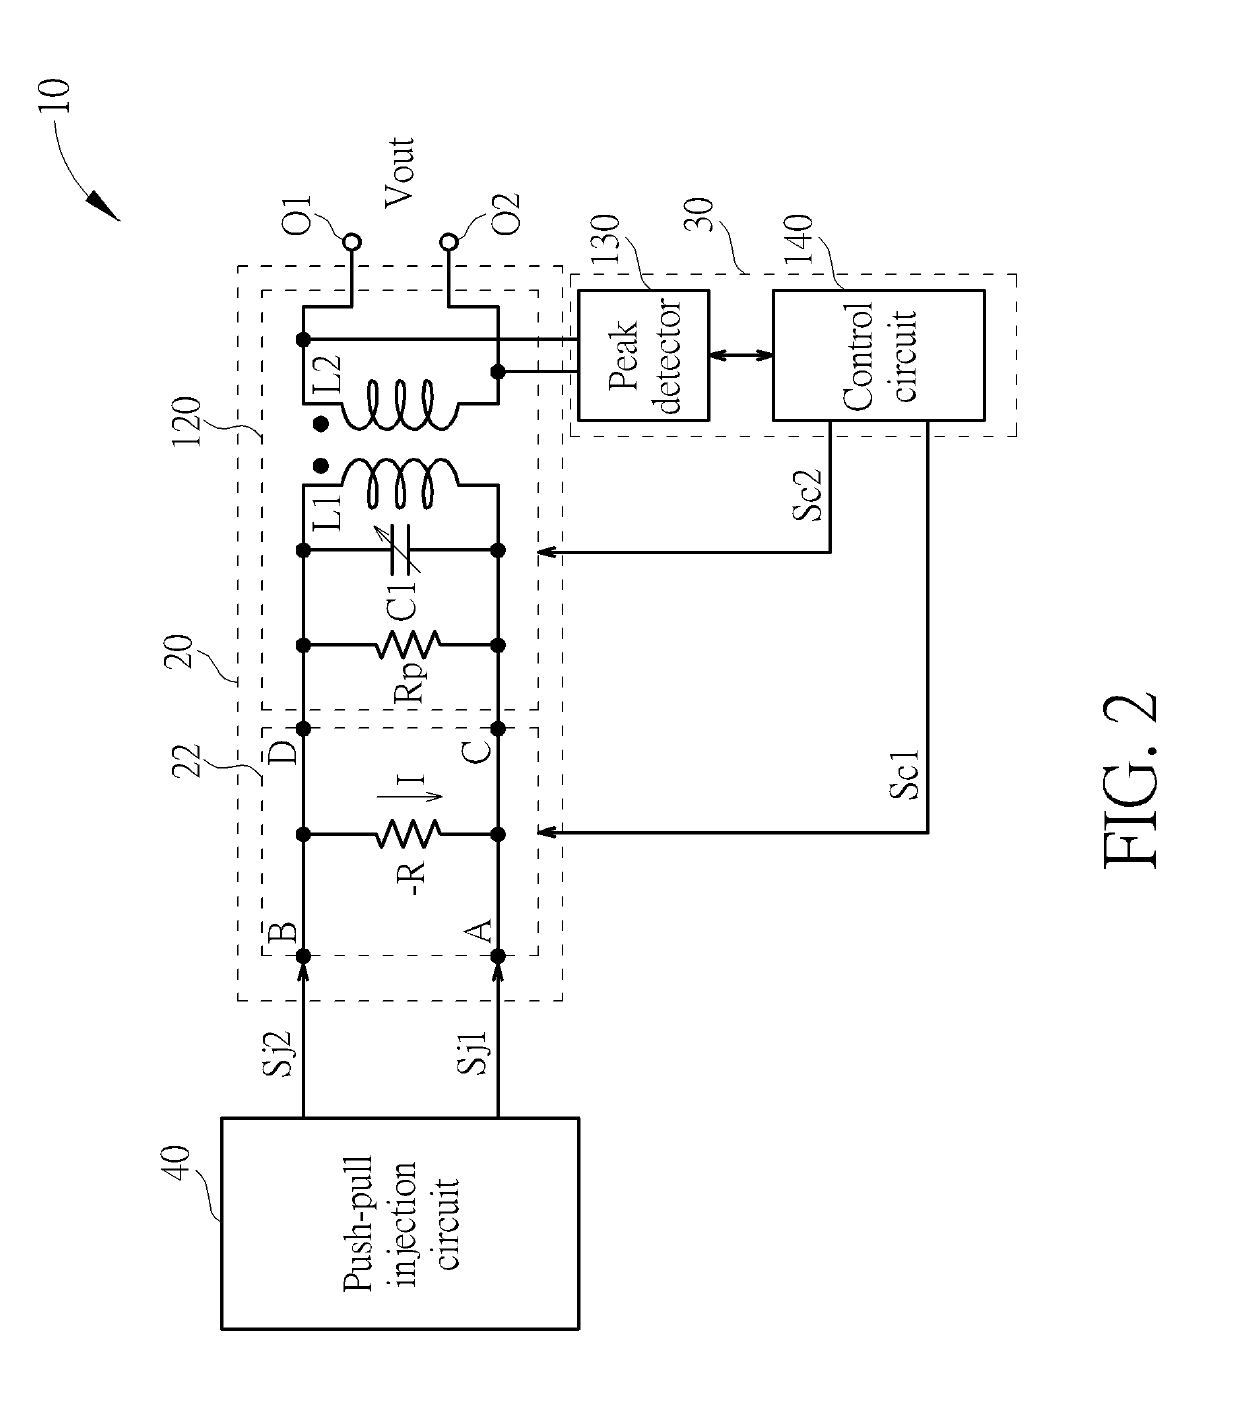 Oscillating circuit and method for calibrating a resonant frequency of an LC tank of an injection-locked oscillator (ILO) of the oscillating circuit while stopping self-oscillation of the ILO